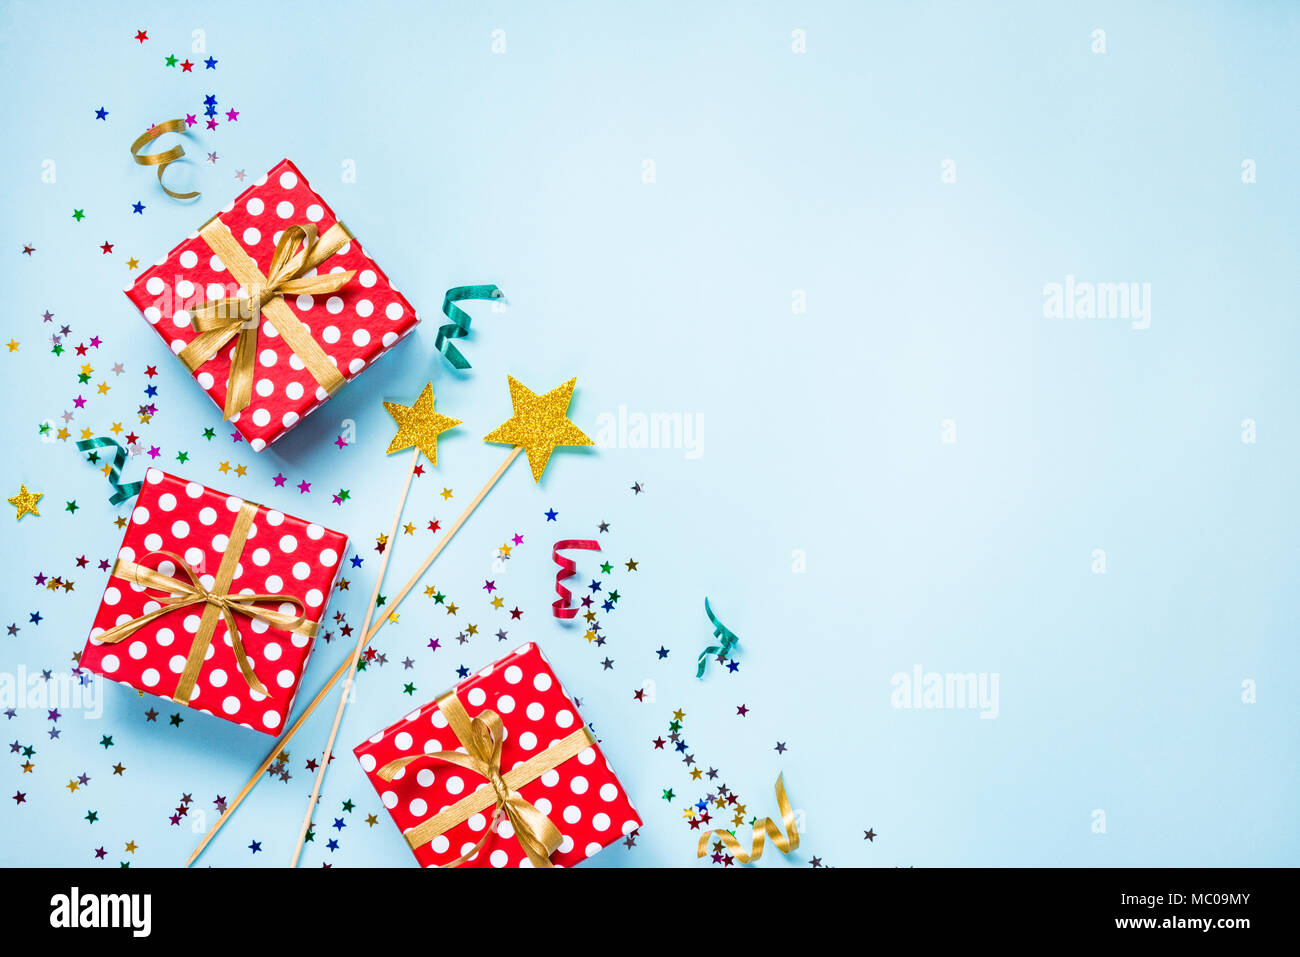 Top view of a red dotted gift boxes, golden magic wands, colorful confetti and ribbons over blue background. Celebration concept. Copy space. Stock Photo